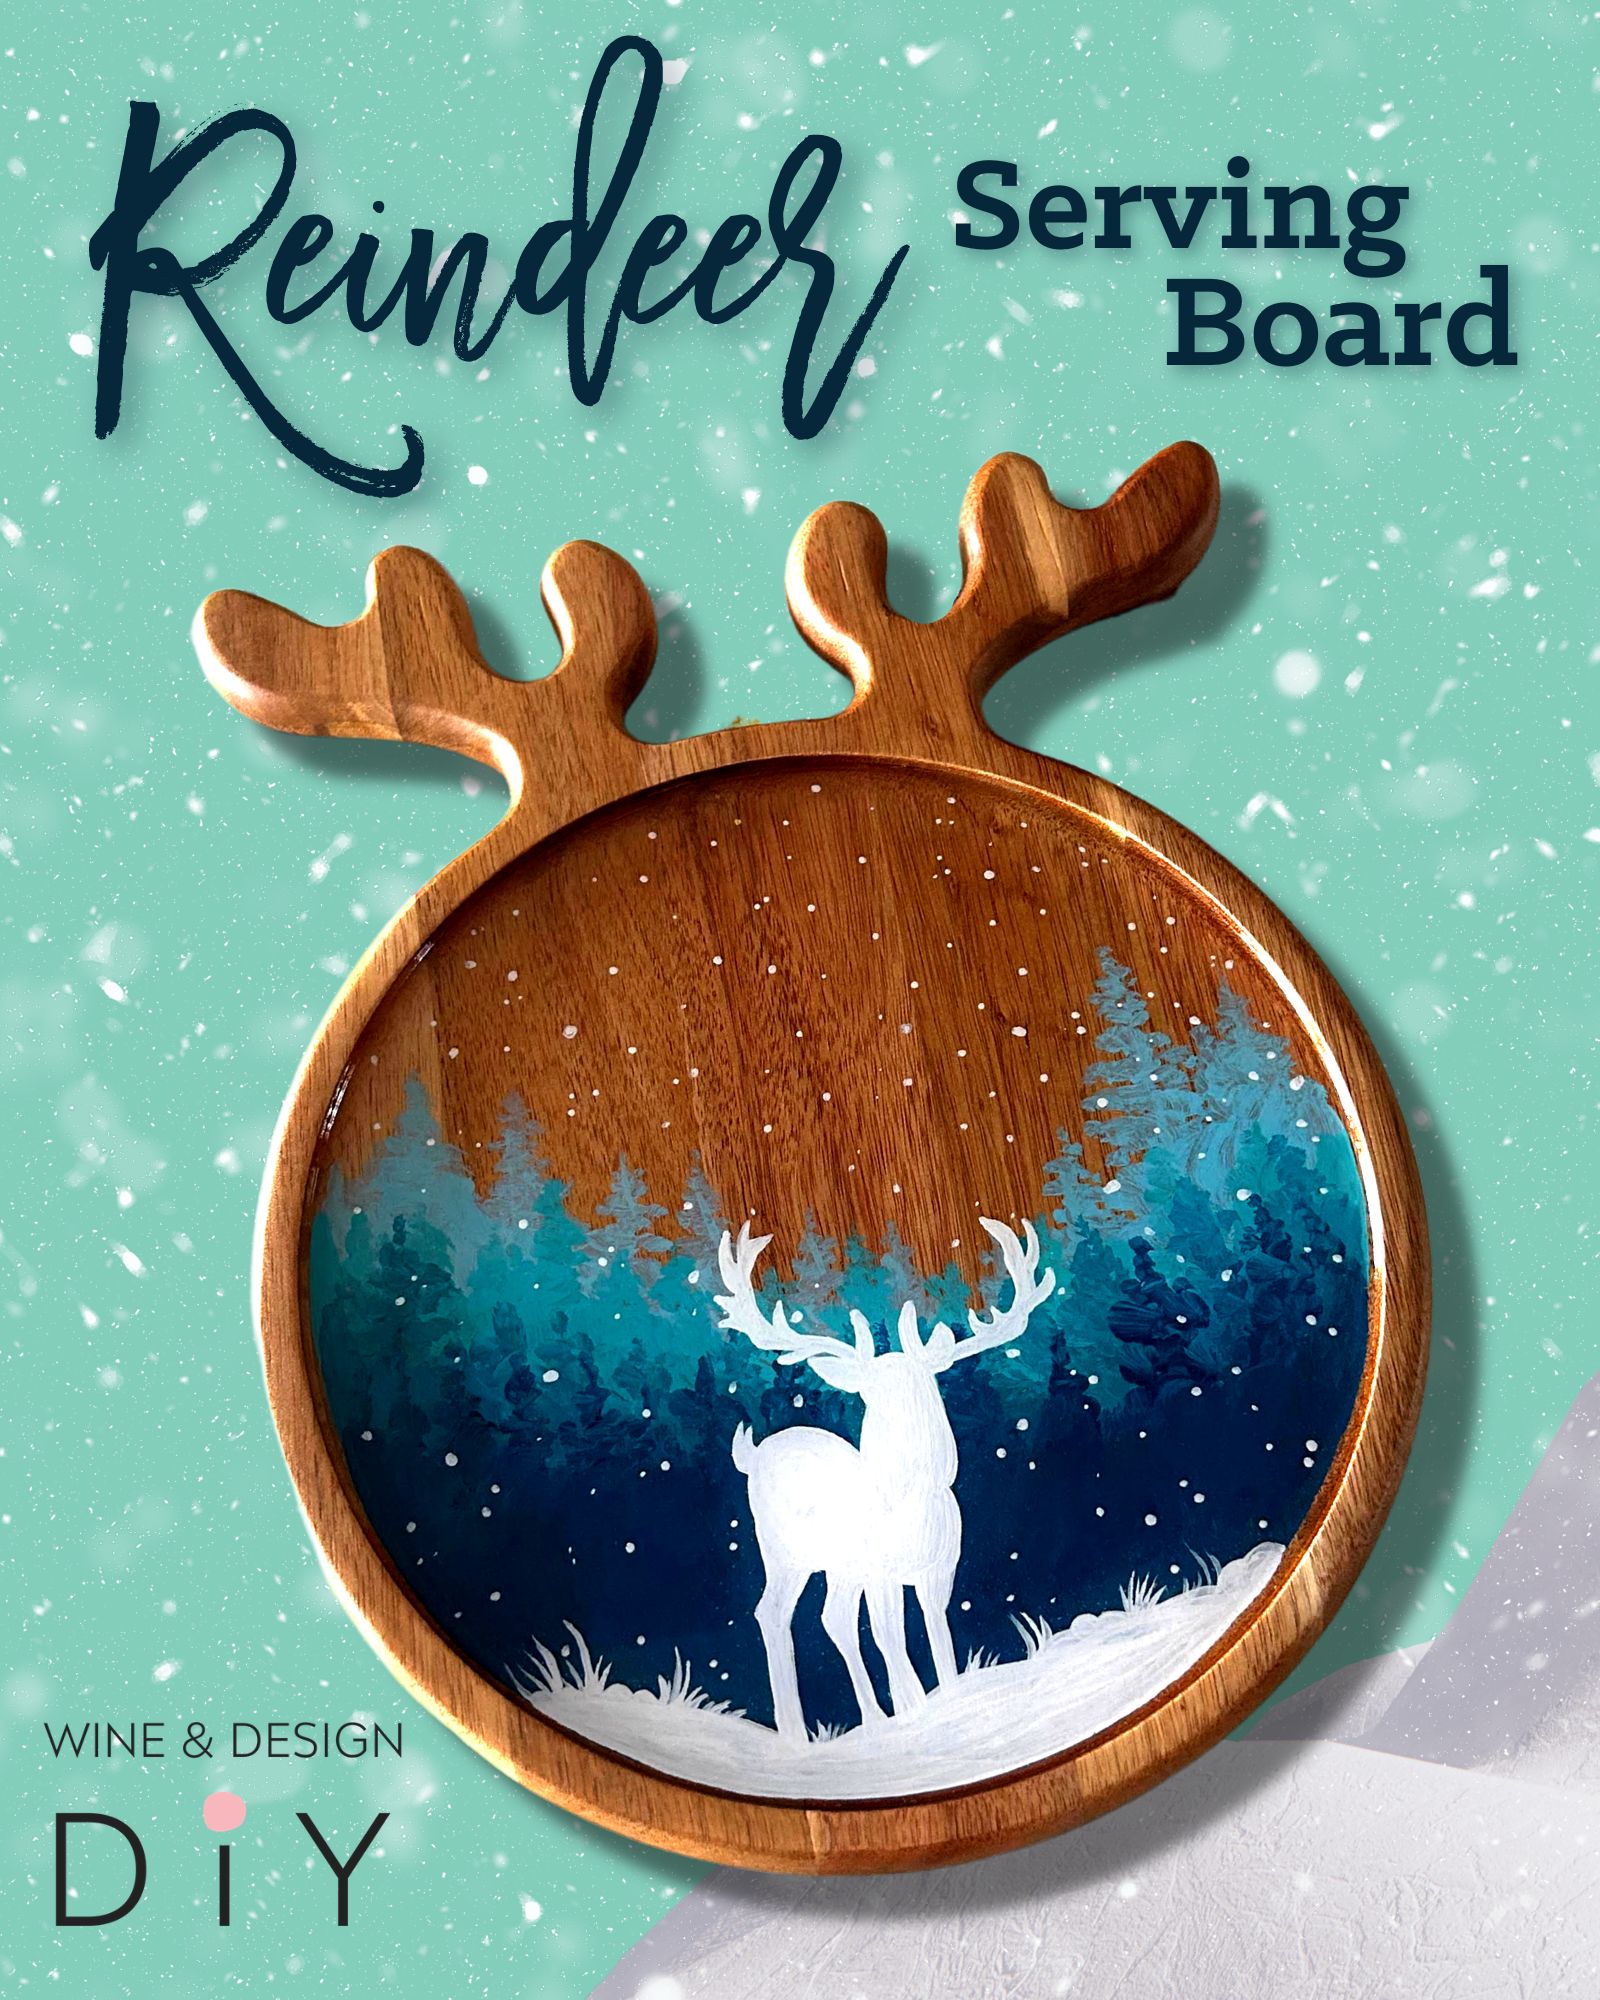 SOLD OUT! New! Reindeer Serving Board